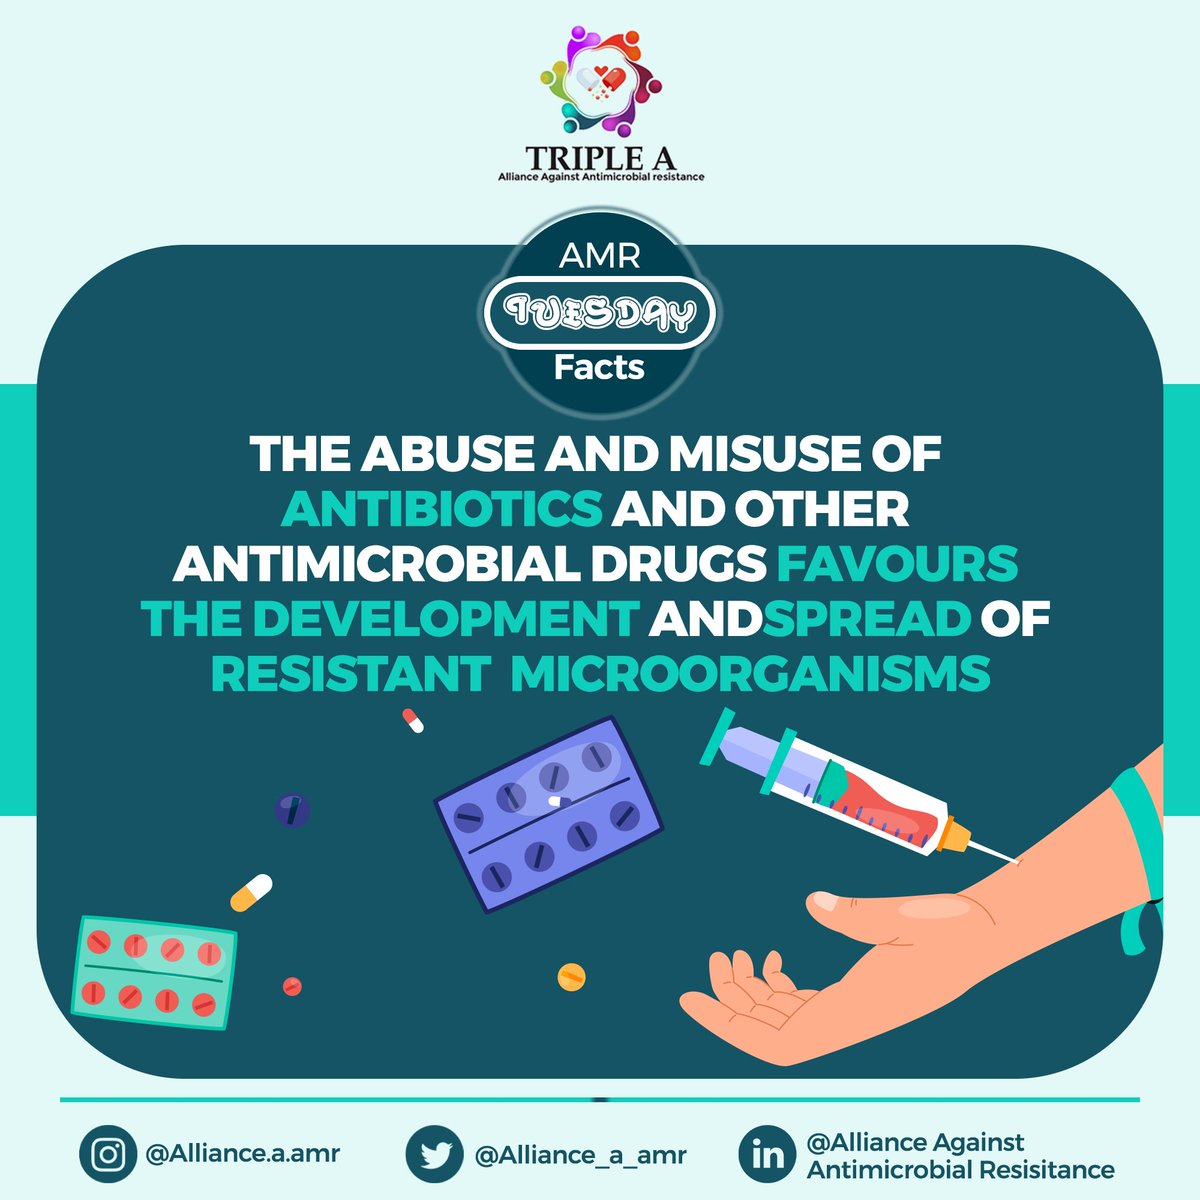 Use Antibiotics the right way. Use all drugs the right way. Only use prescribed drug. 

#saynotodrugabuse #AMR  #publichealth